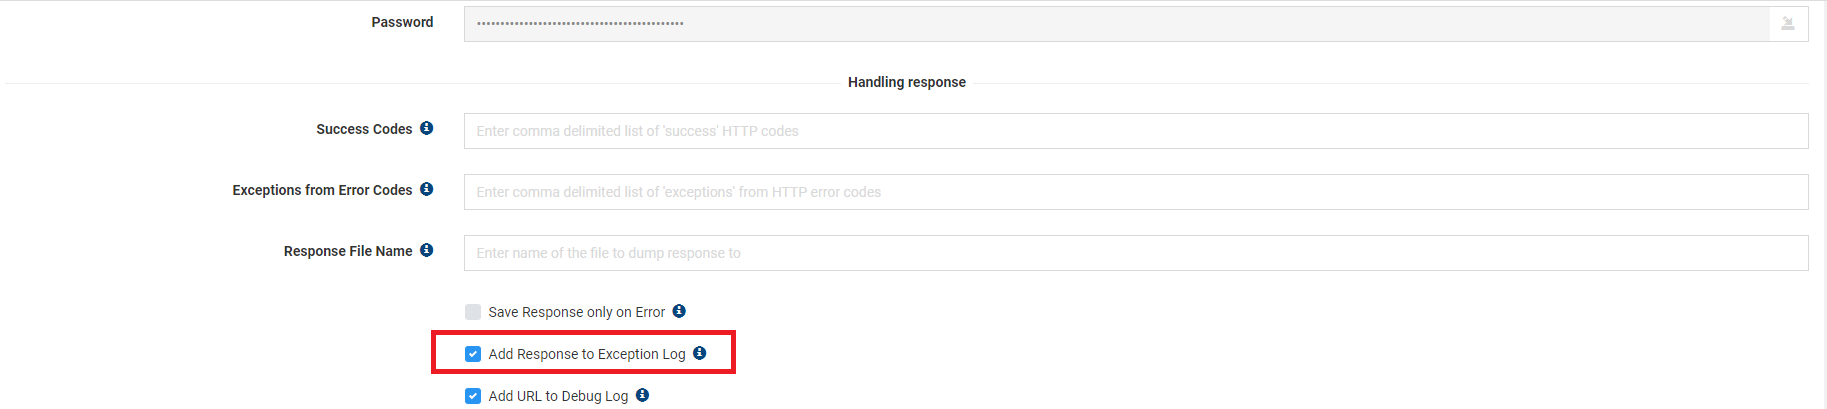 http-add-response-to-log.png